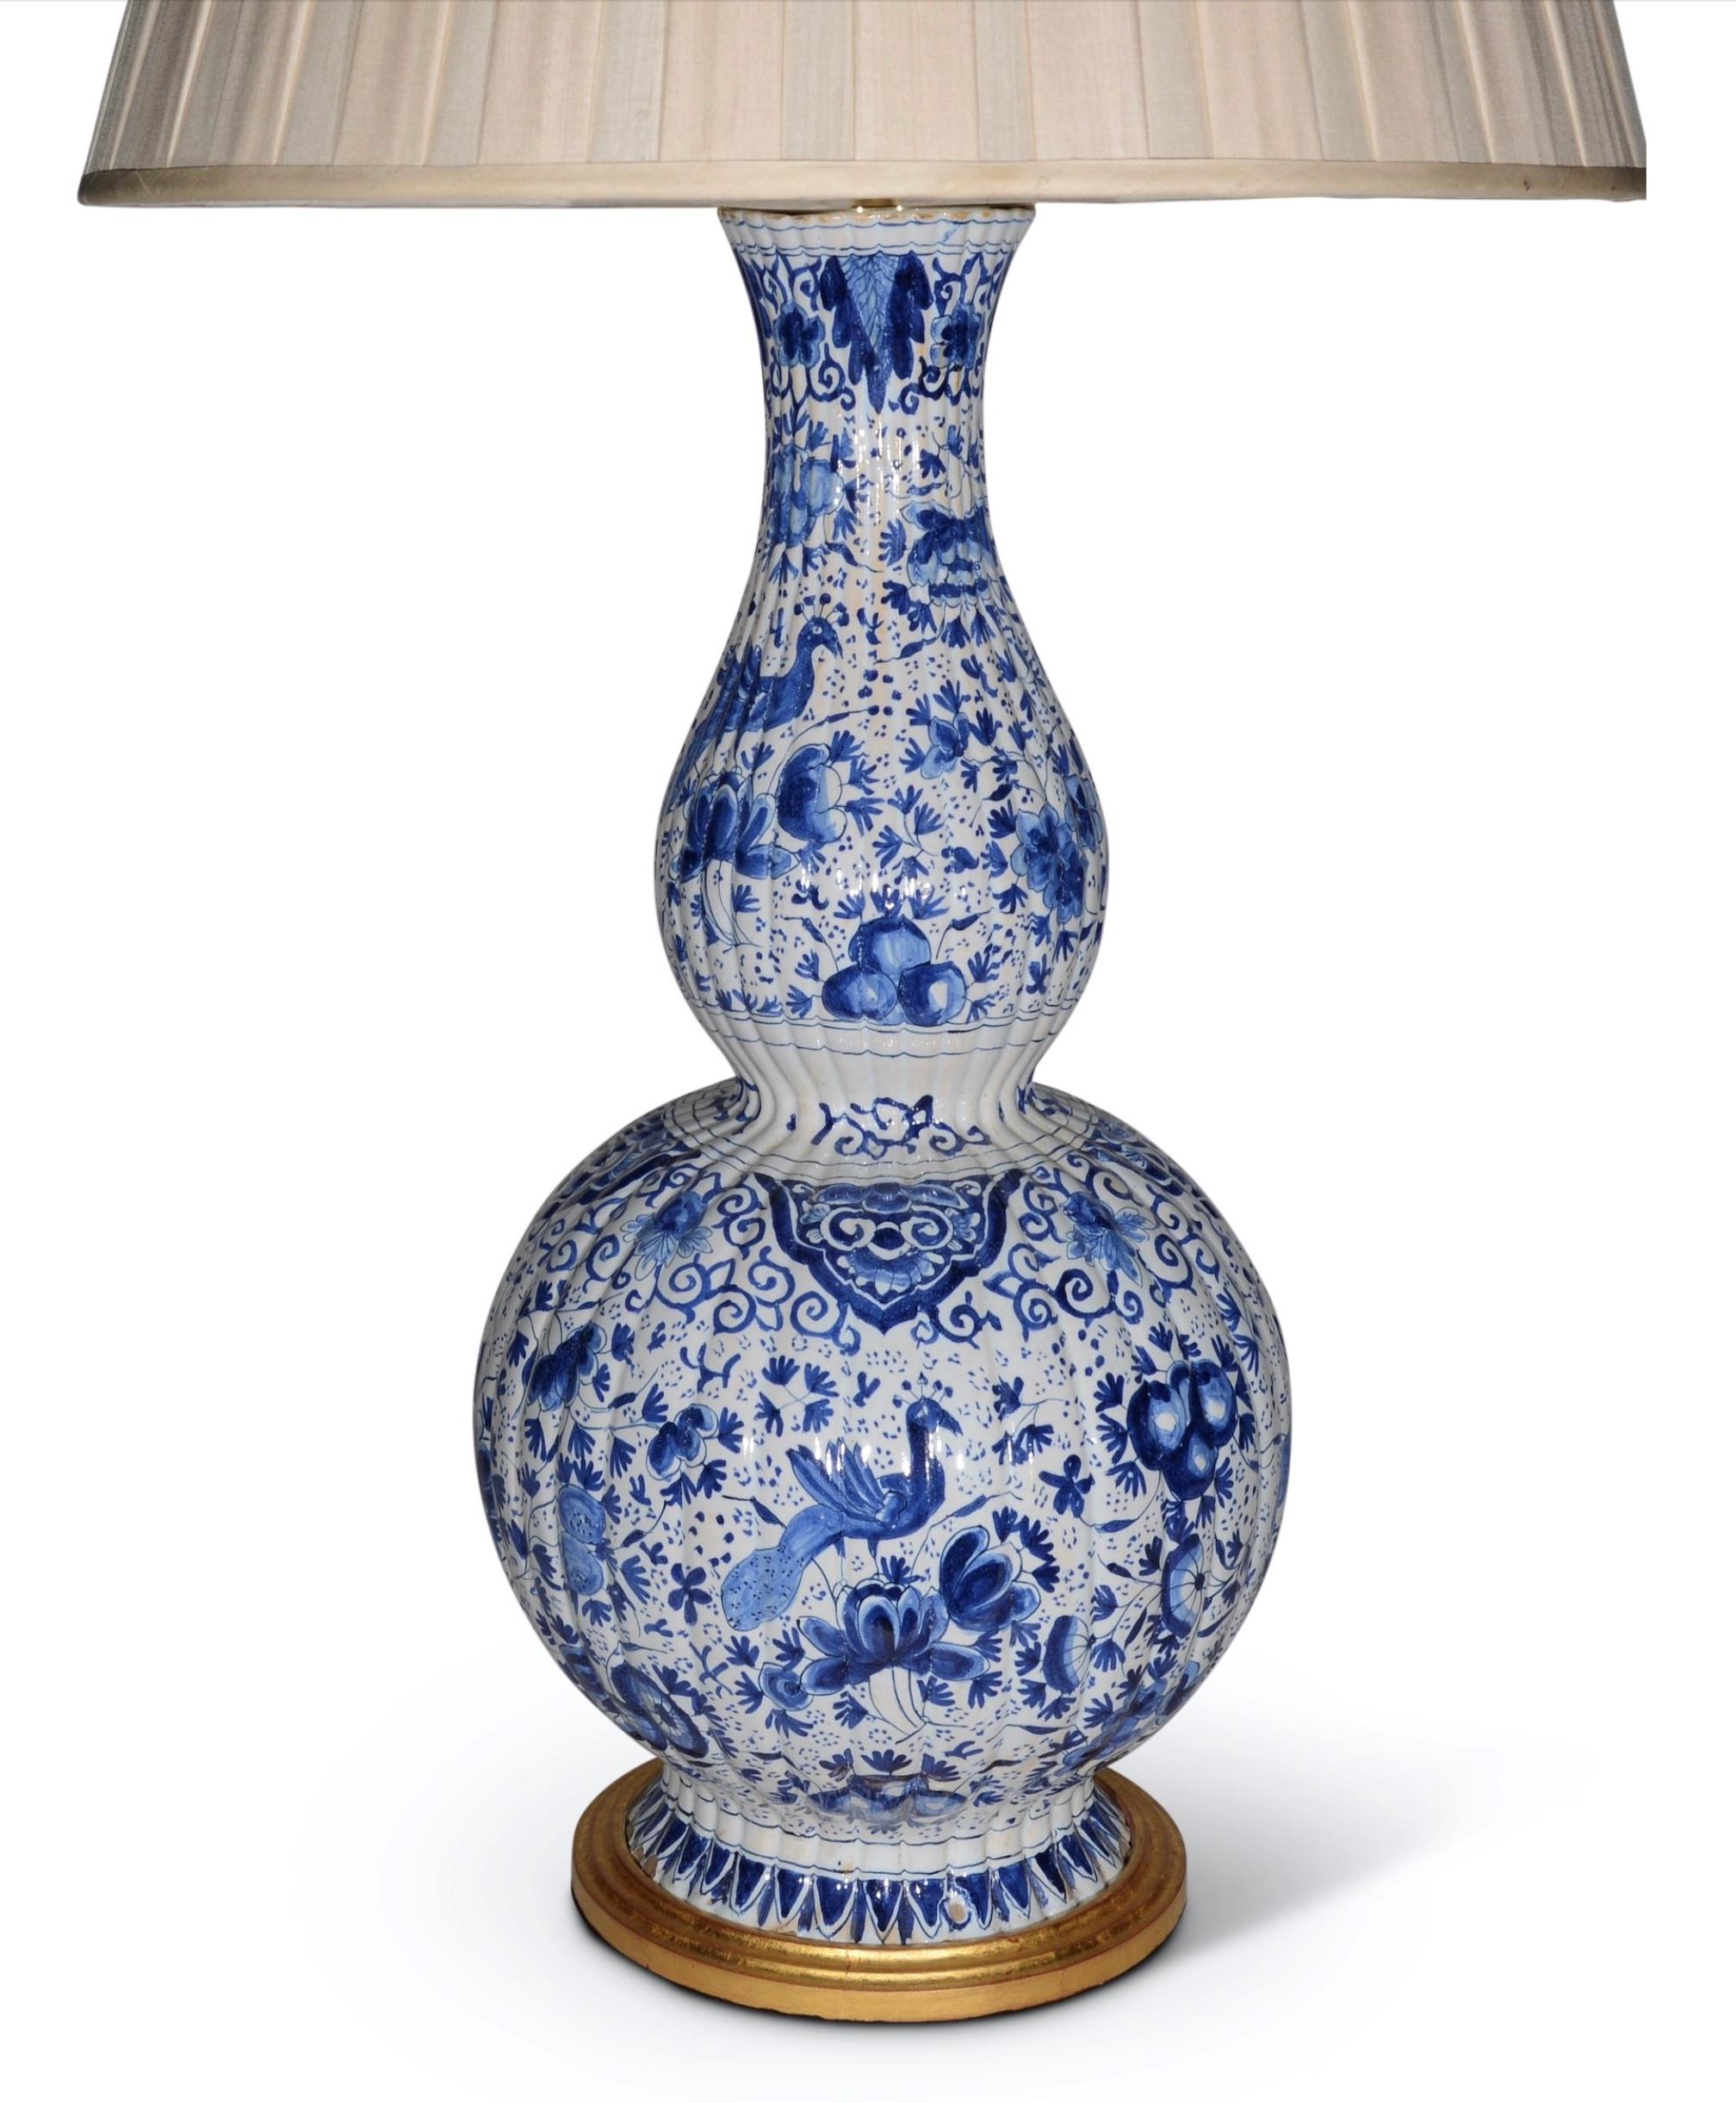 A magnificent pair of  large Dutch Delft vases. Of double gourd form, and decorated throughout with exotic birds amongst stylised floral and foliate decoration in tones of blues on a white background. Now mounted as lamps wit hand-gilded turned